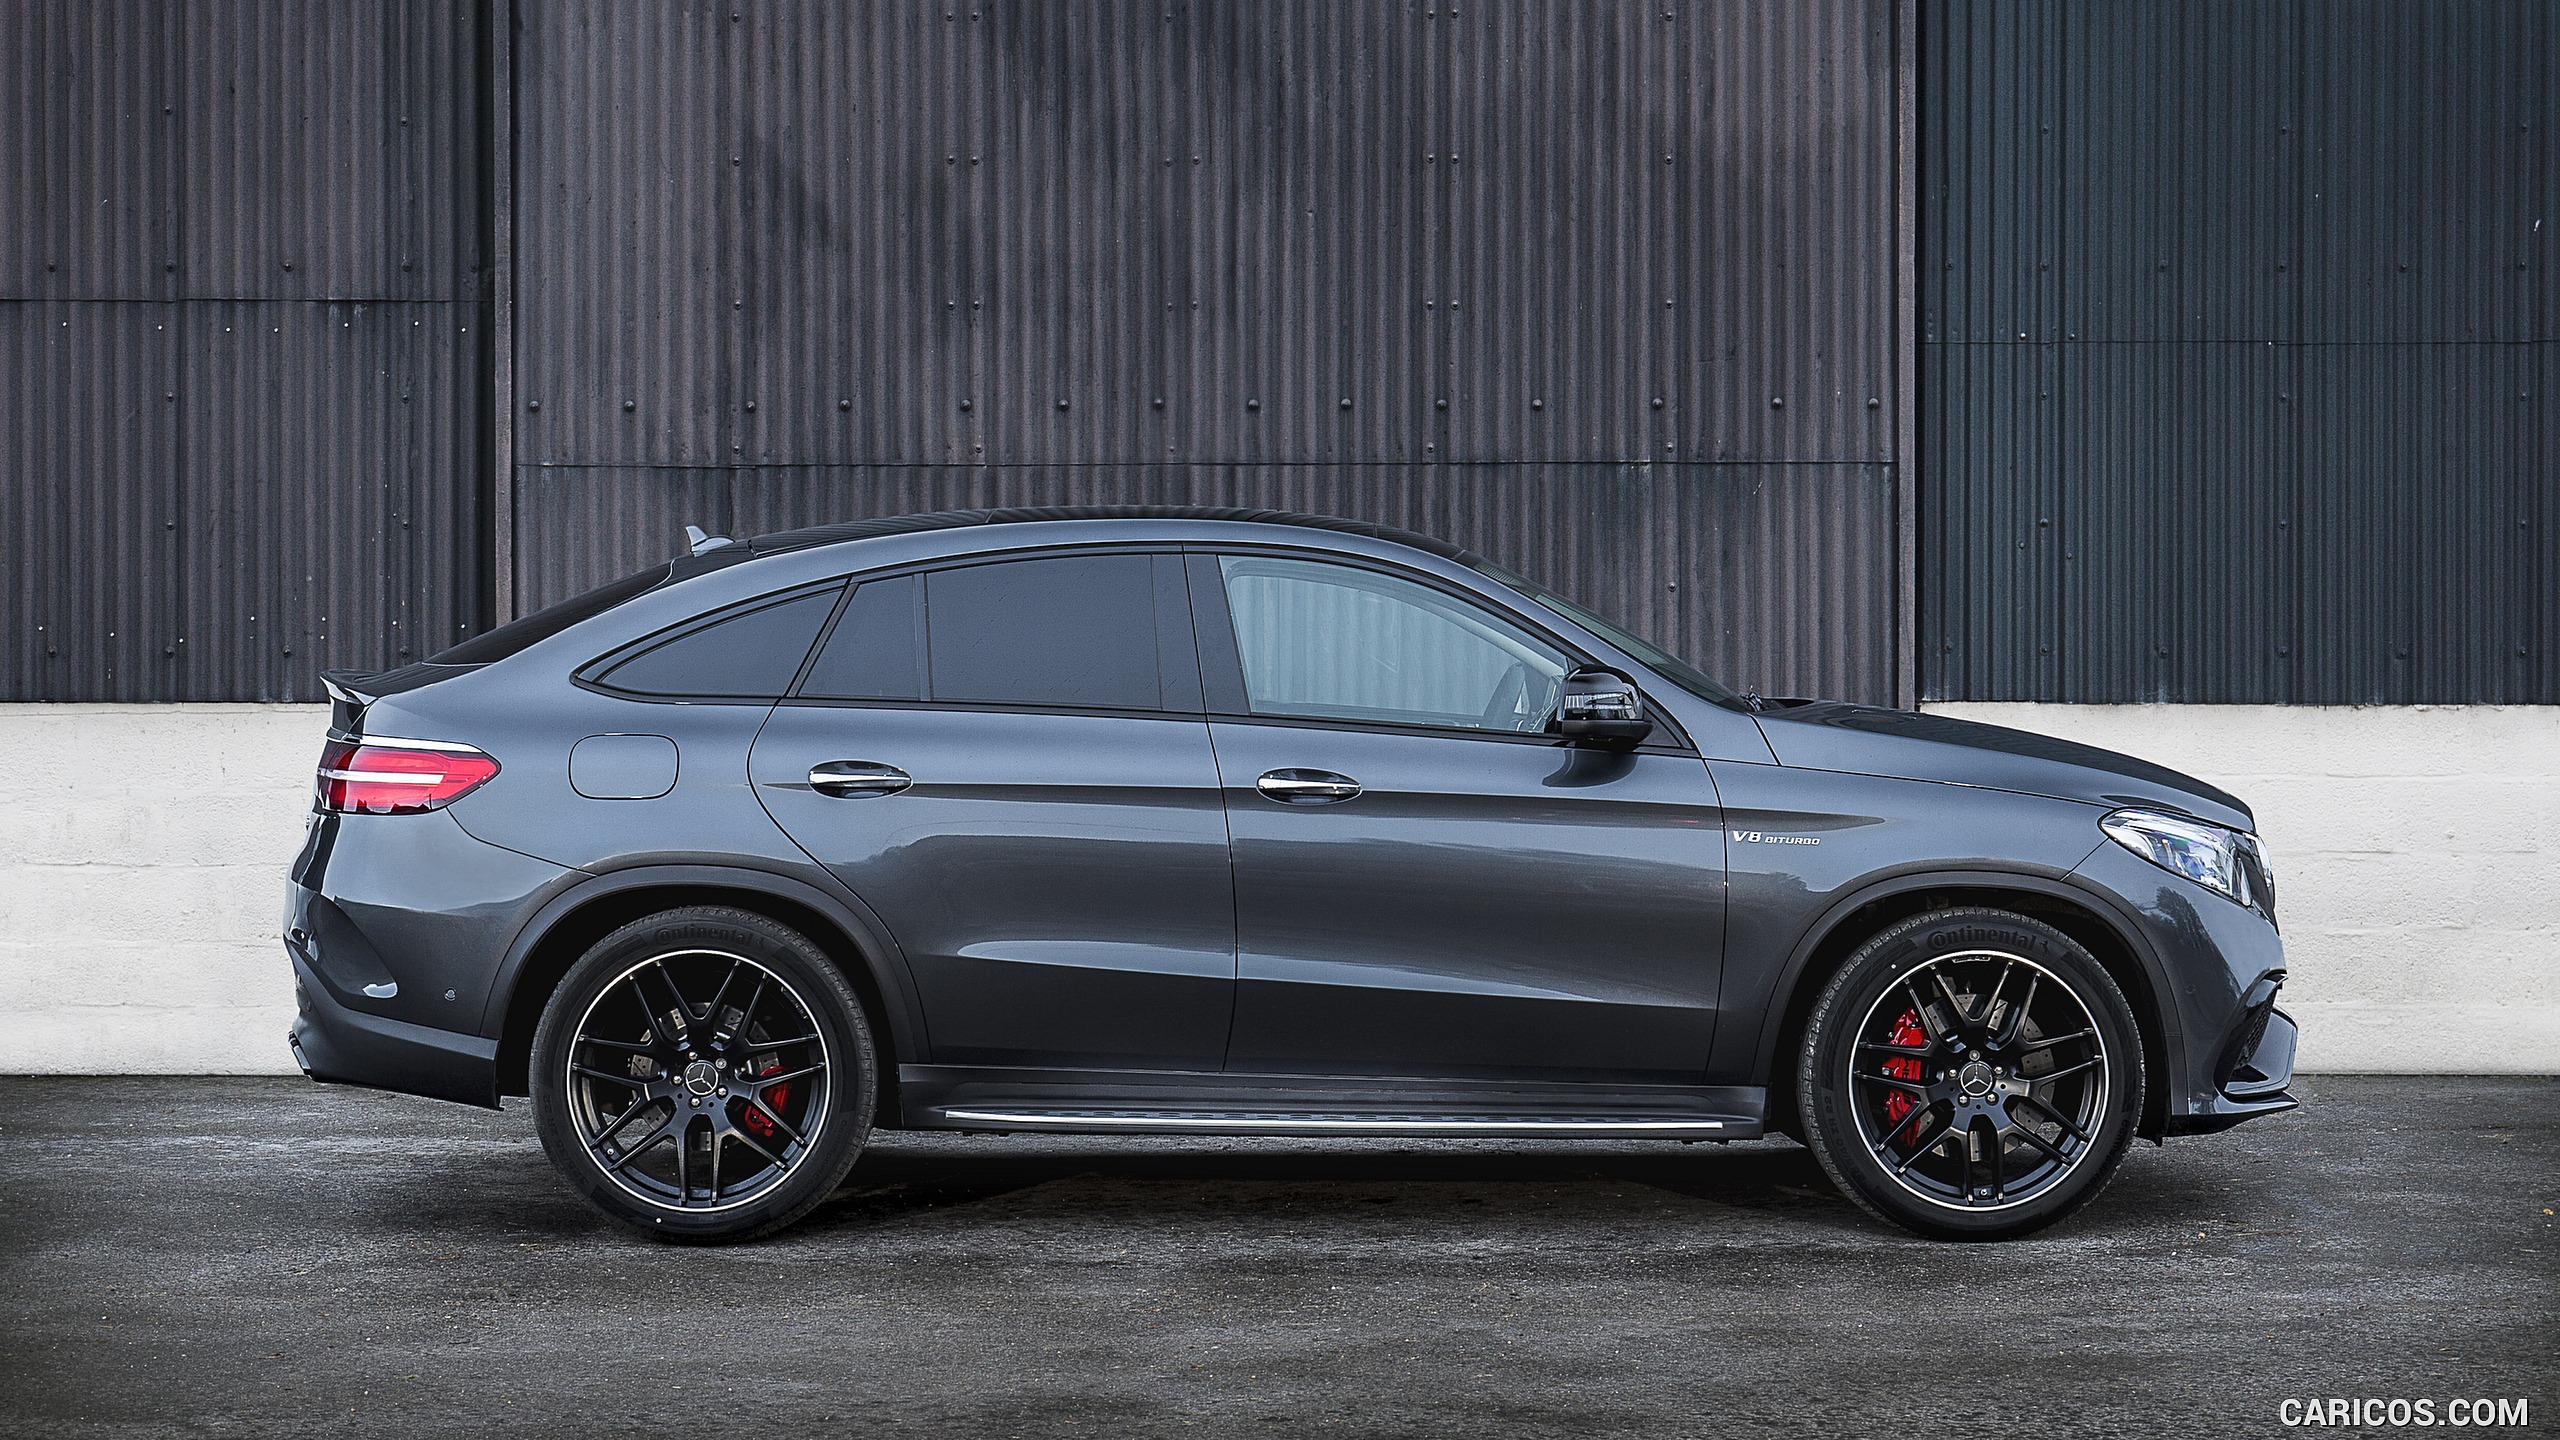 2016 Mercedes-AMG GLE 63 S Coupe (UK-Spec) - Side, #55 of 65